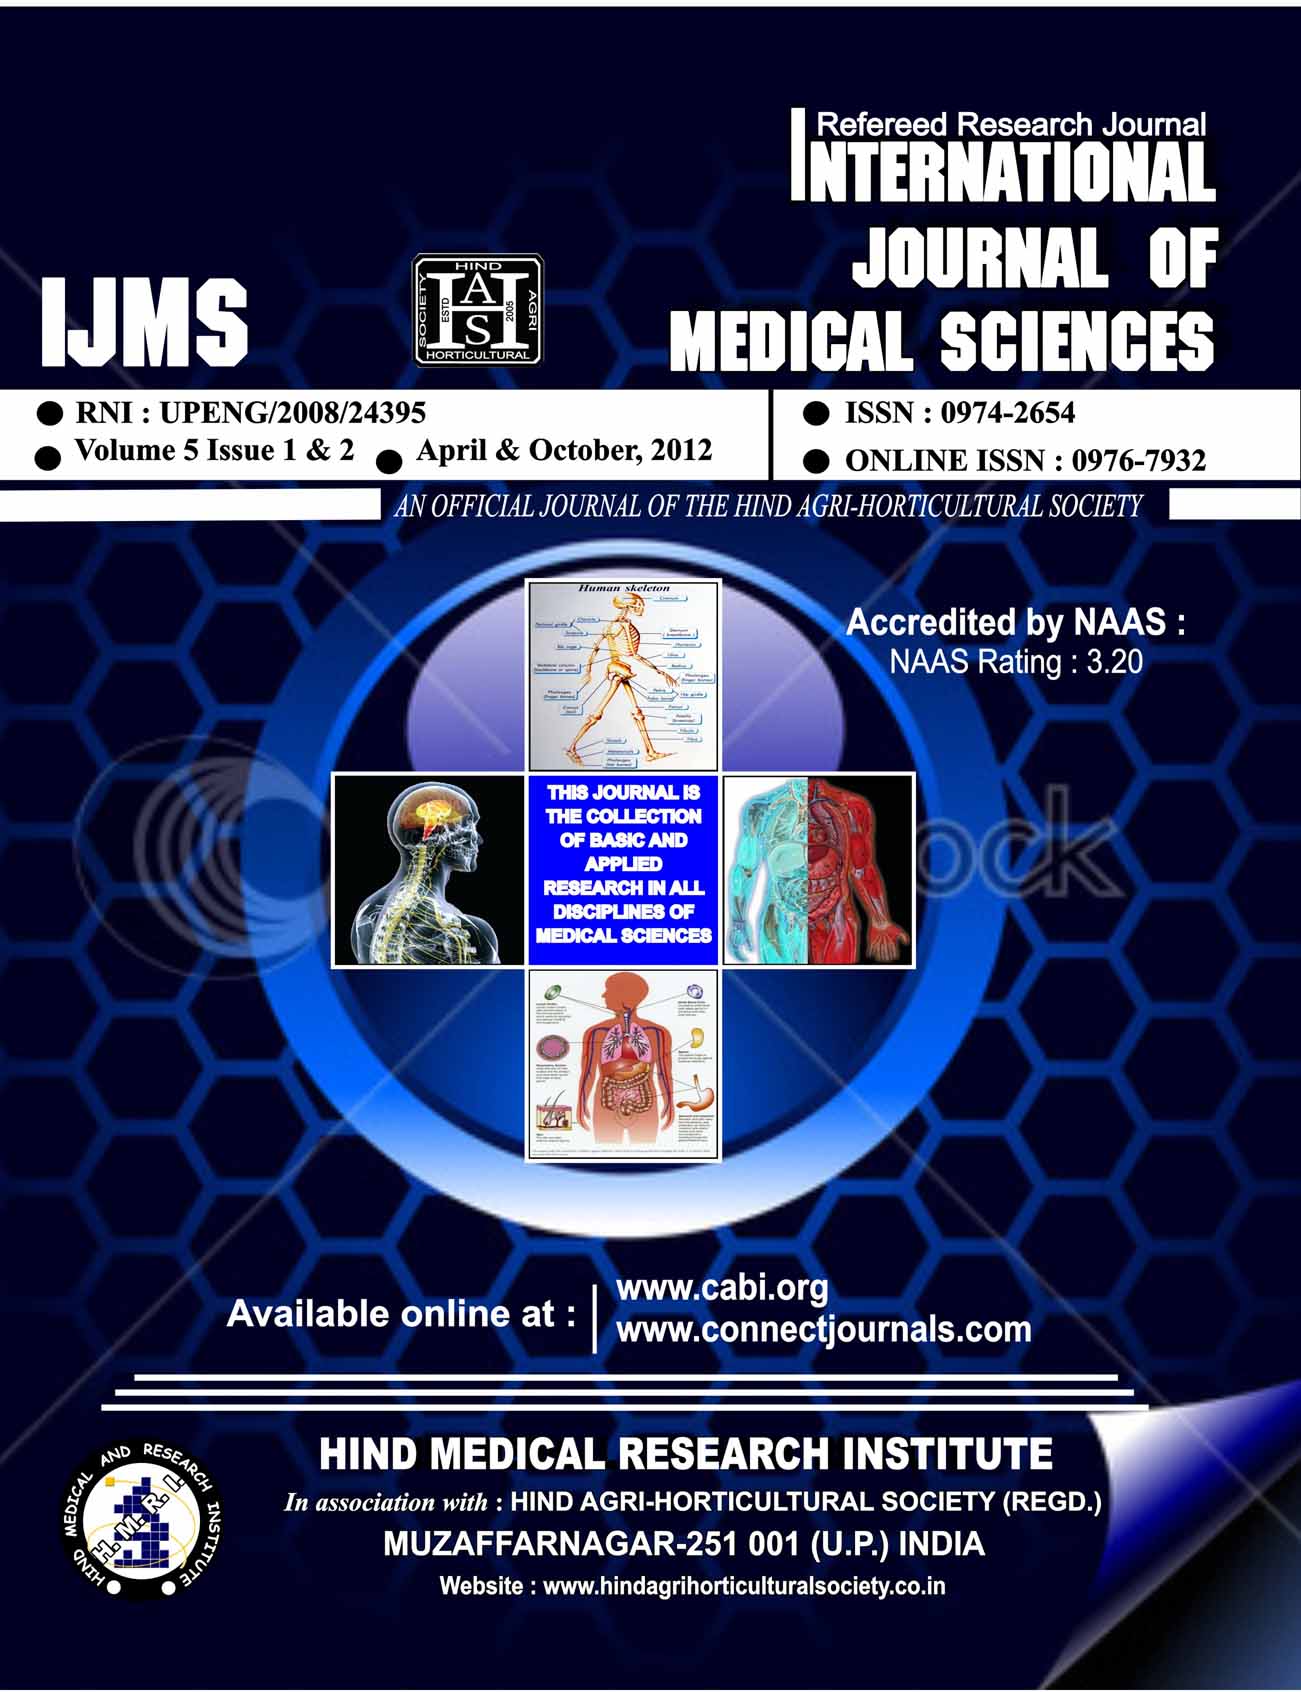 journal of international medical research editor in chief